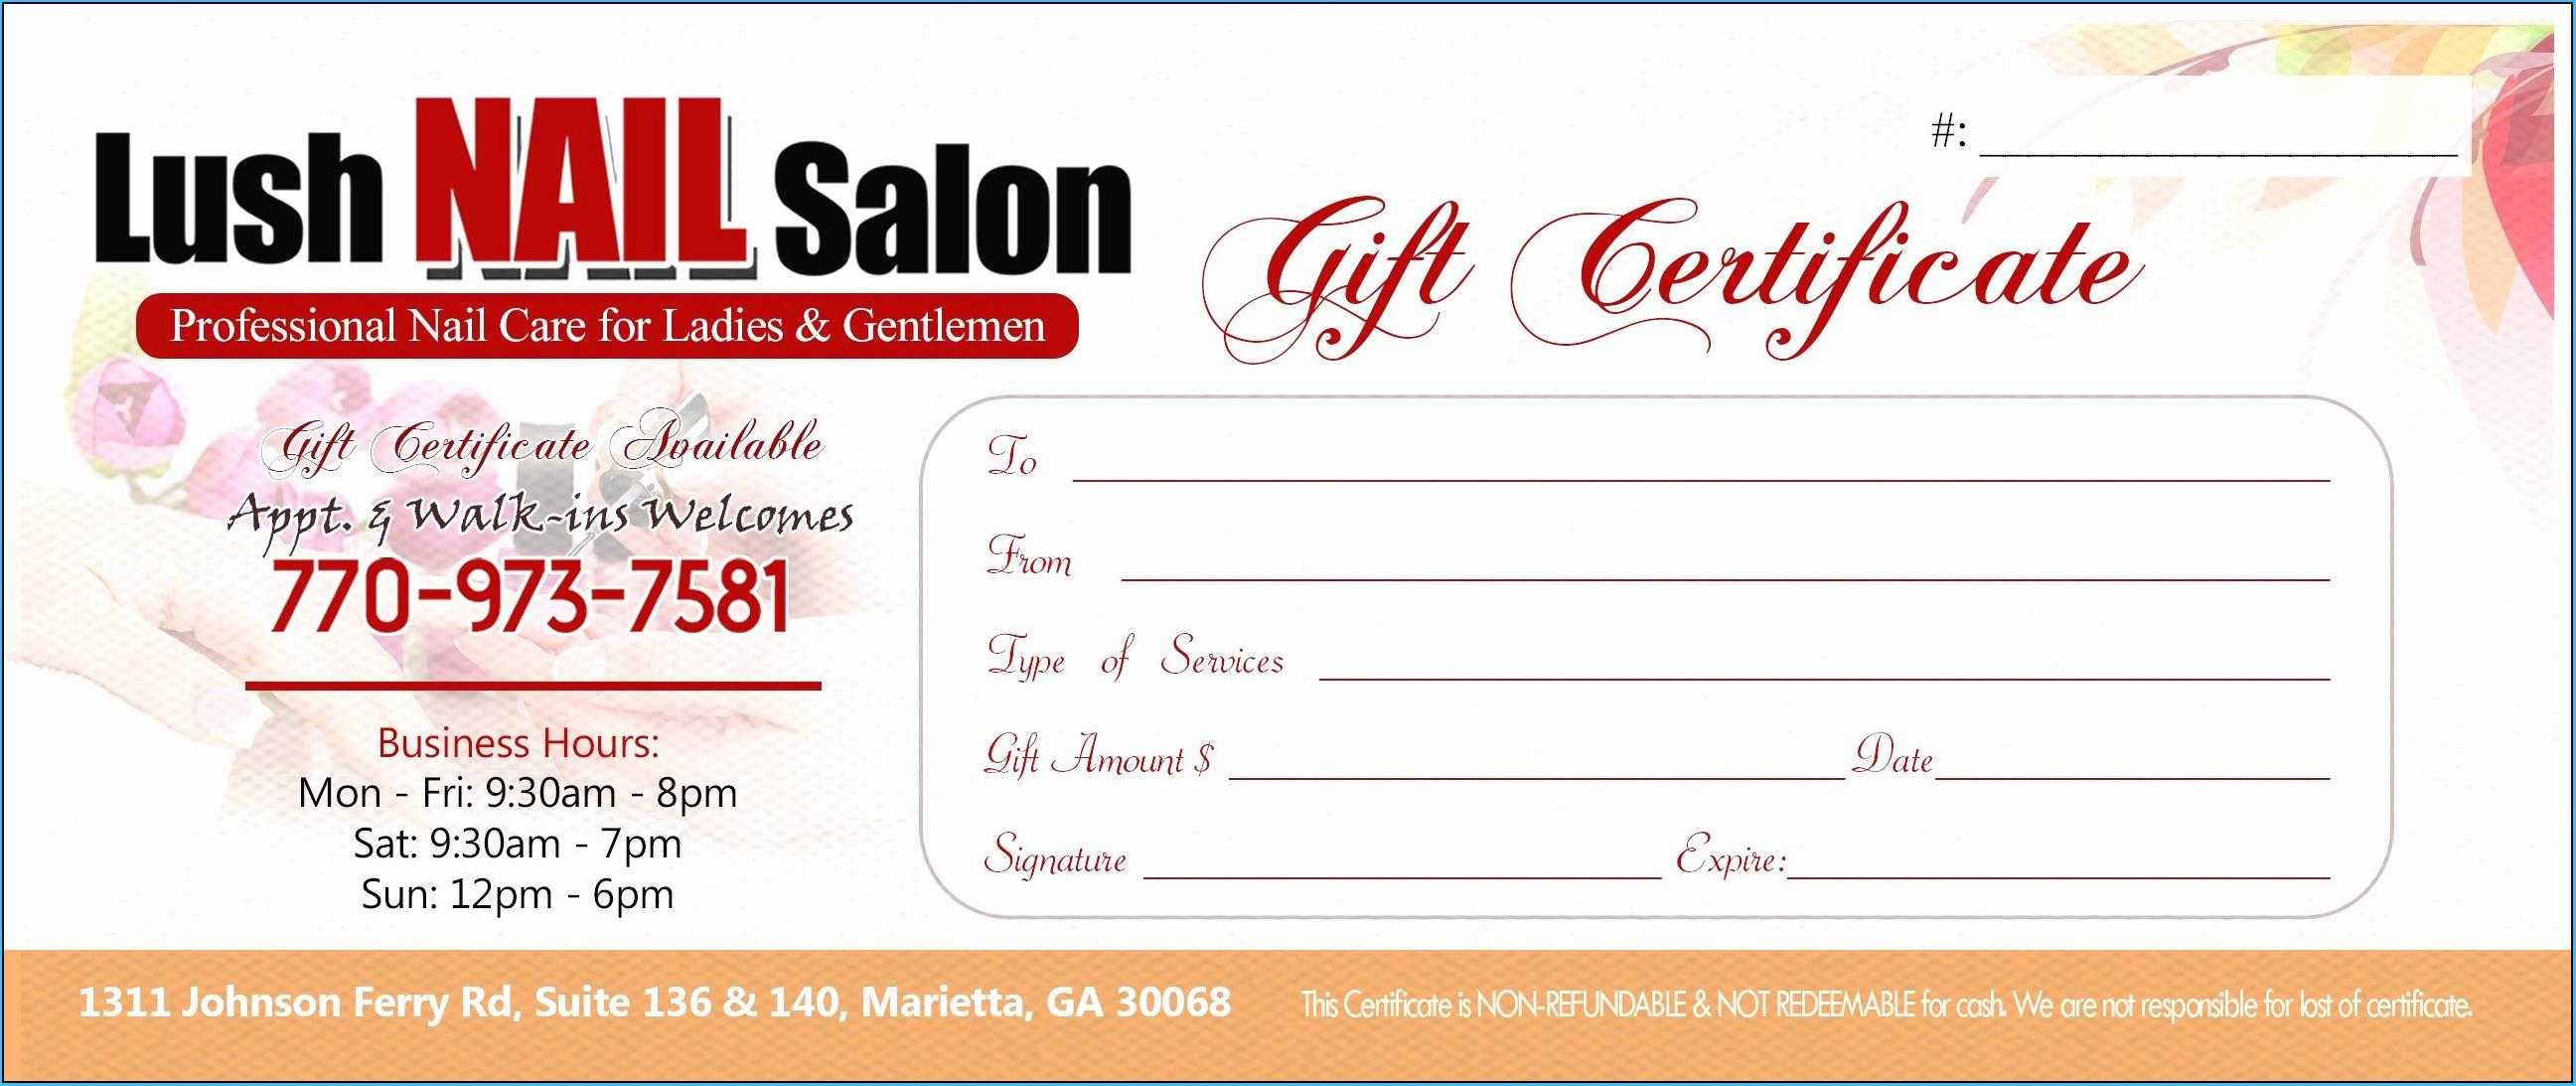 Lularoe Gift Certificate Template #8170 Intended For Walking Certificate Templates